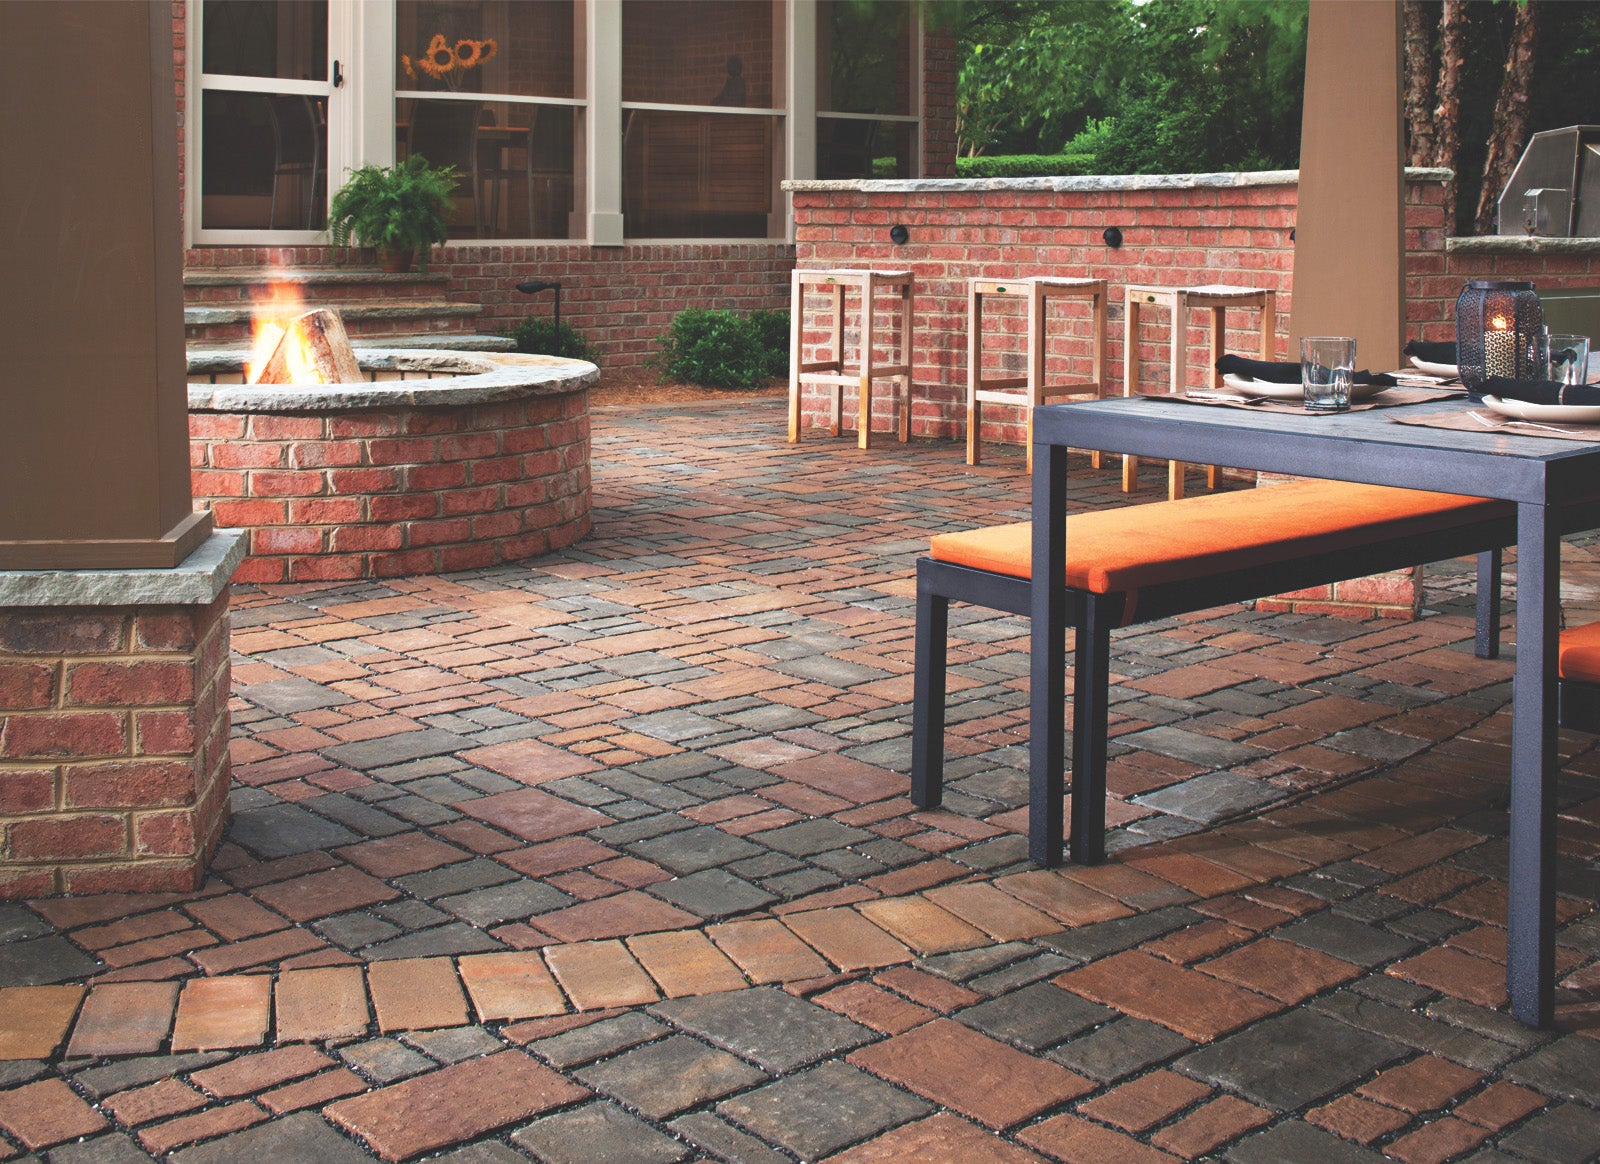 This outdoor living design incorporates several of the most popular trends this year: permeable pavers, fire pit, 